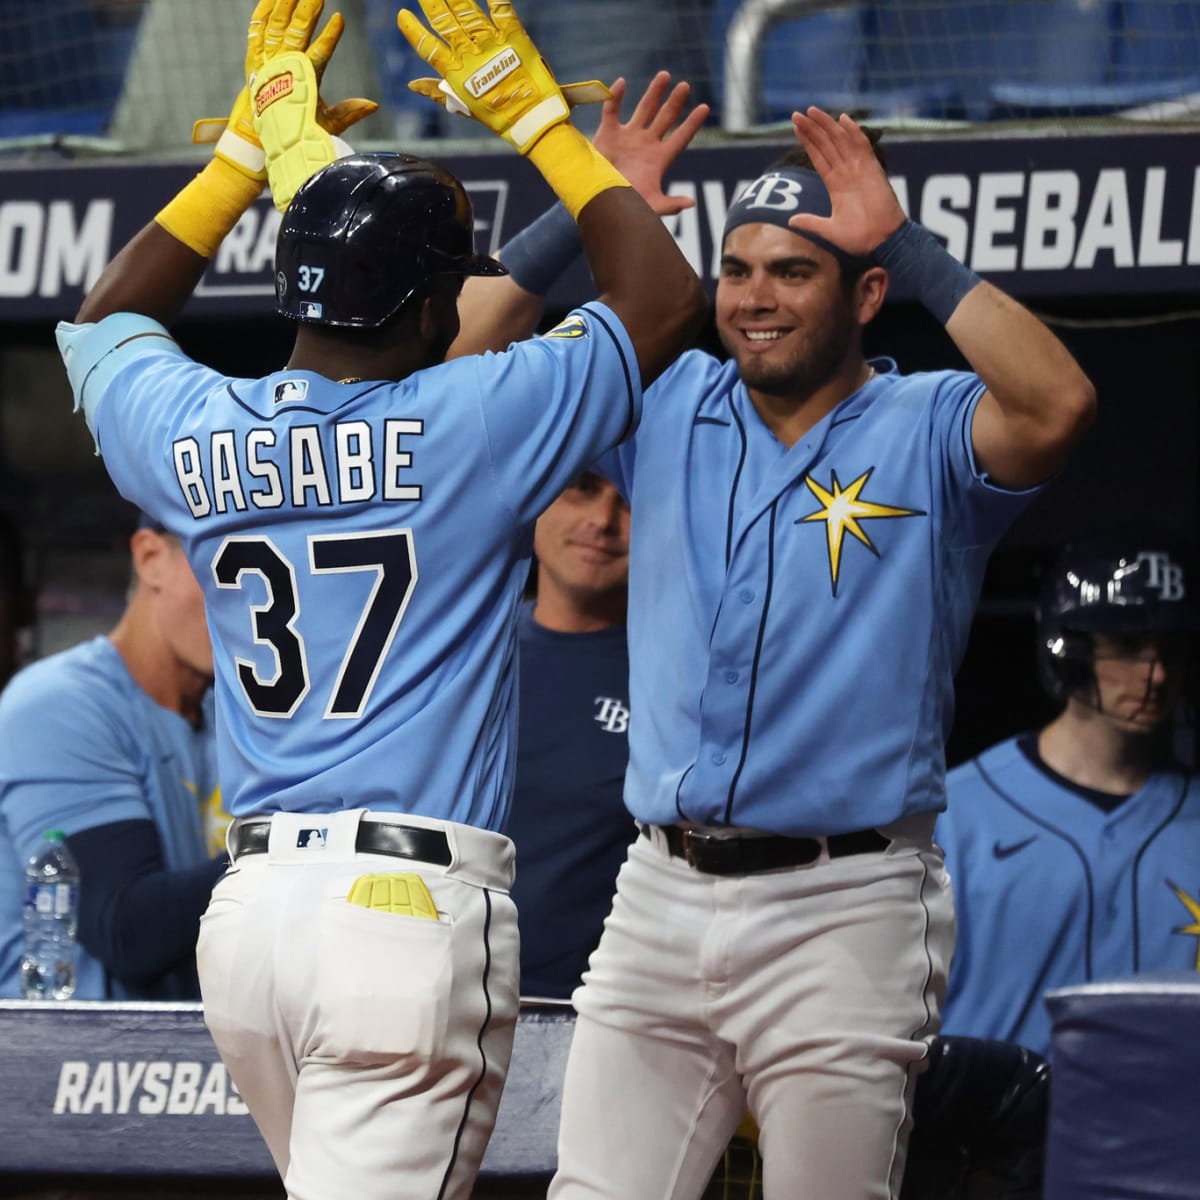 Tampa Bay Rays Top 59 Prospects